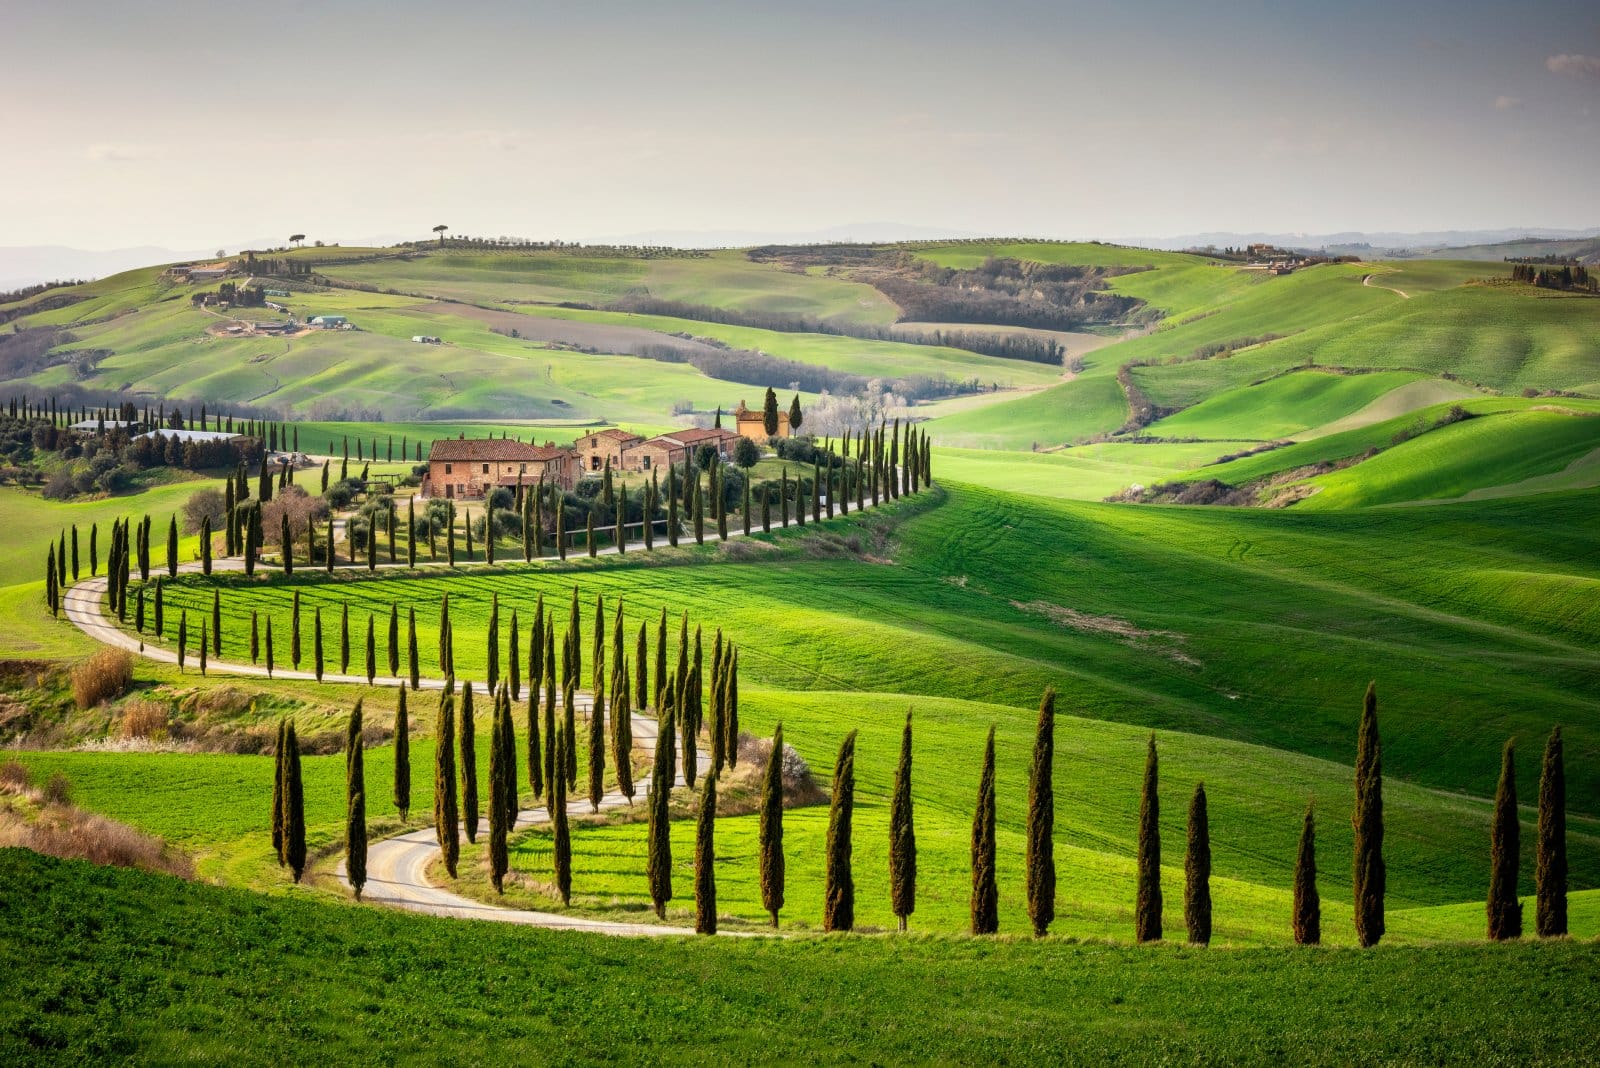 <p class="wp-caption-text">Image Credit: Shutterstock / Massimo Santi</p>  <p><span>With its rolling hills, vineyards, and timeless art cities like Florence and Siena, Tuscany is a haven for senior travelers seeking a blend of cultural enrichment and relaxation. The region’s slow pace of life, world-renowned cuisine, and easy accessibility make it an ideal destination. Explore the Uffizi Gallery, take a wine-tasting tour in Chianti, or simply enjoy the serene beauty of the Tuscan countryside. Accommodations range from luxurious villas to cozy farmhouses, ensuring comfort throughout your stay.</span></p>